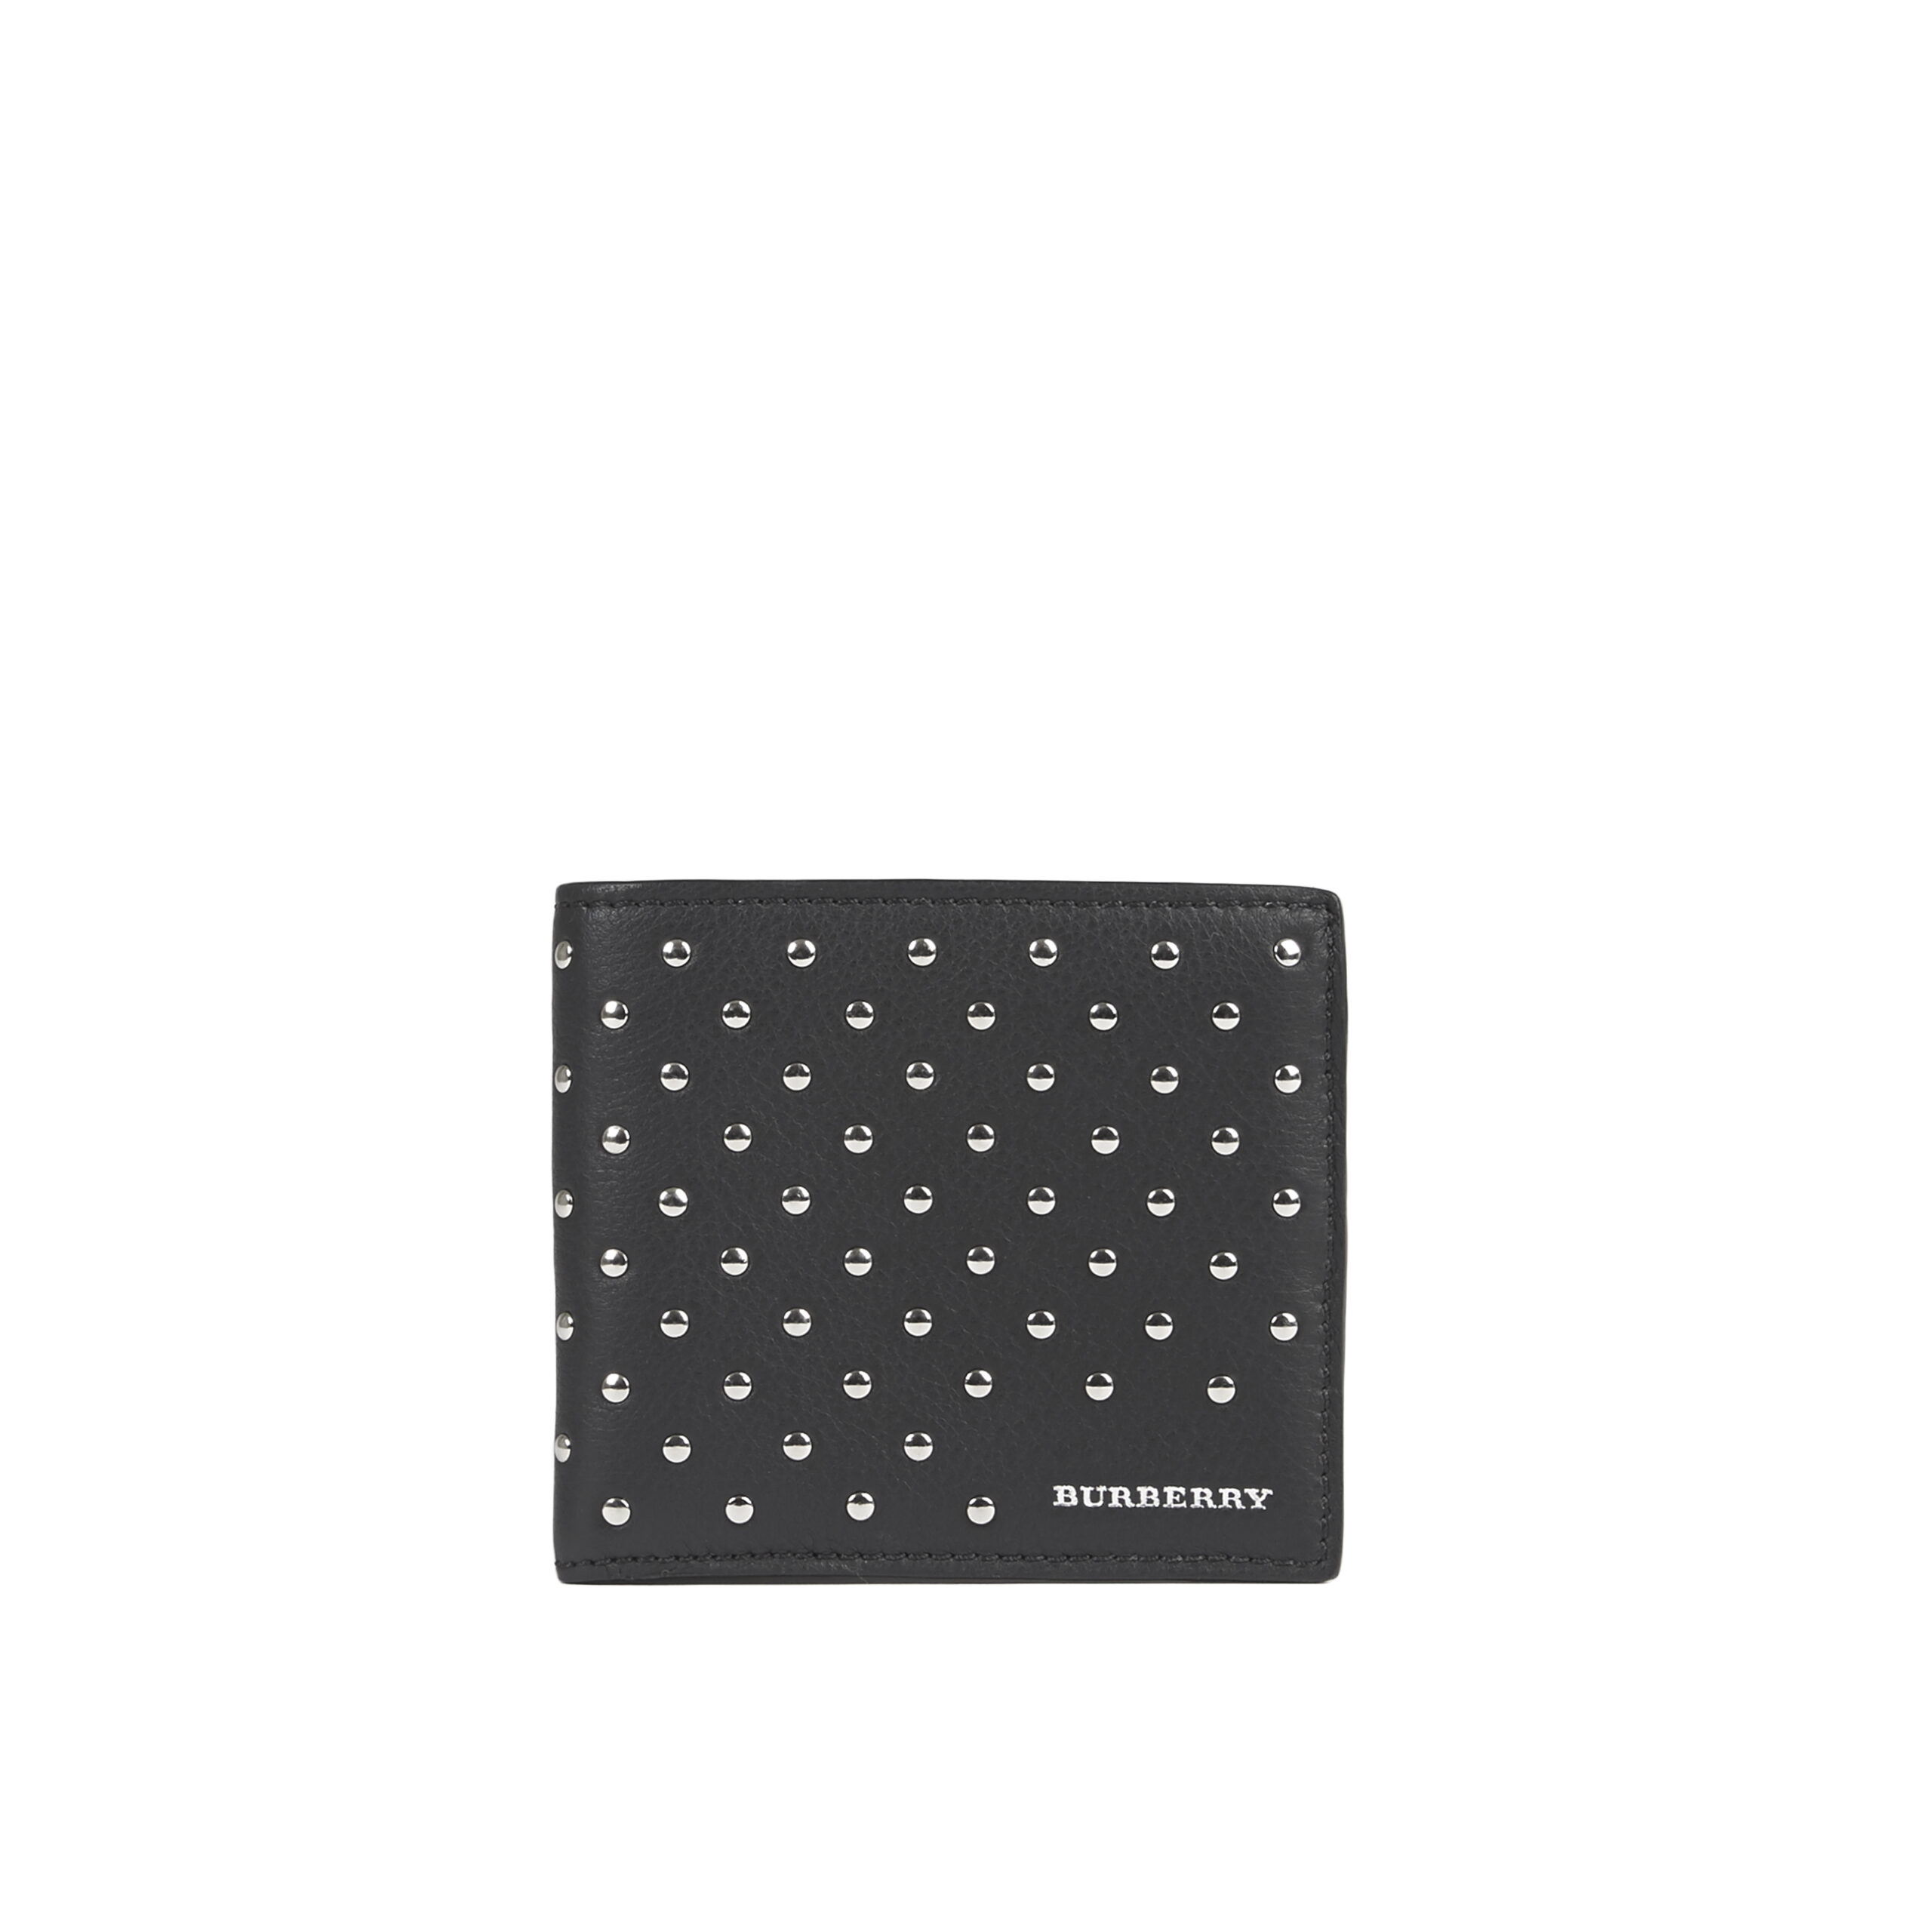 the-reg-billfold-wallet-in-black-with-silver-studs